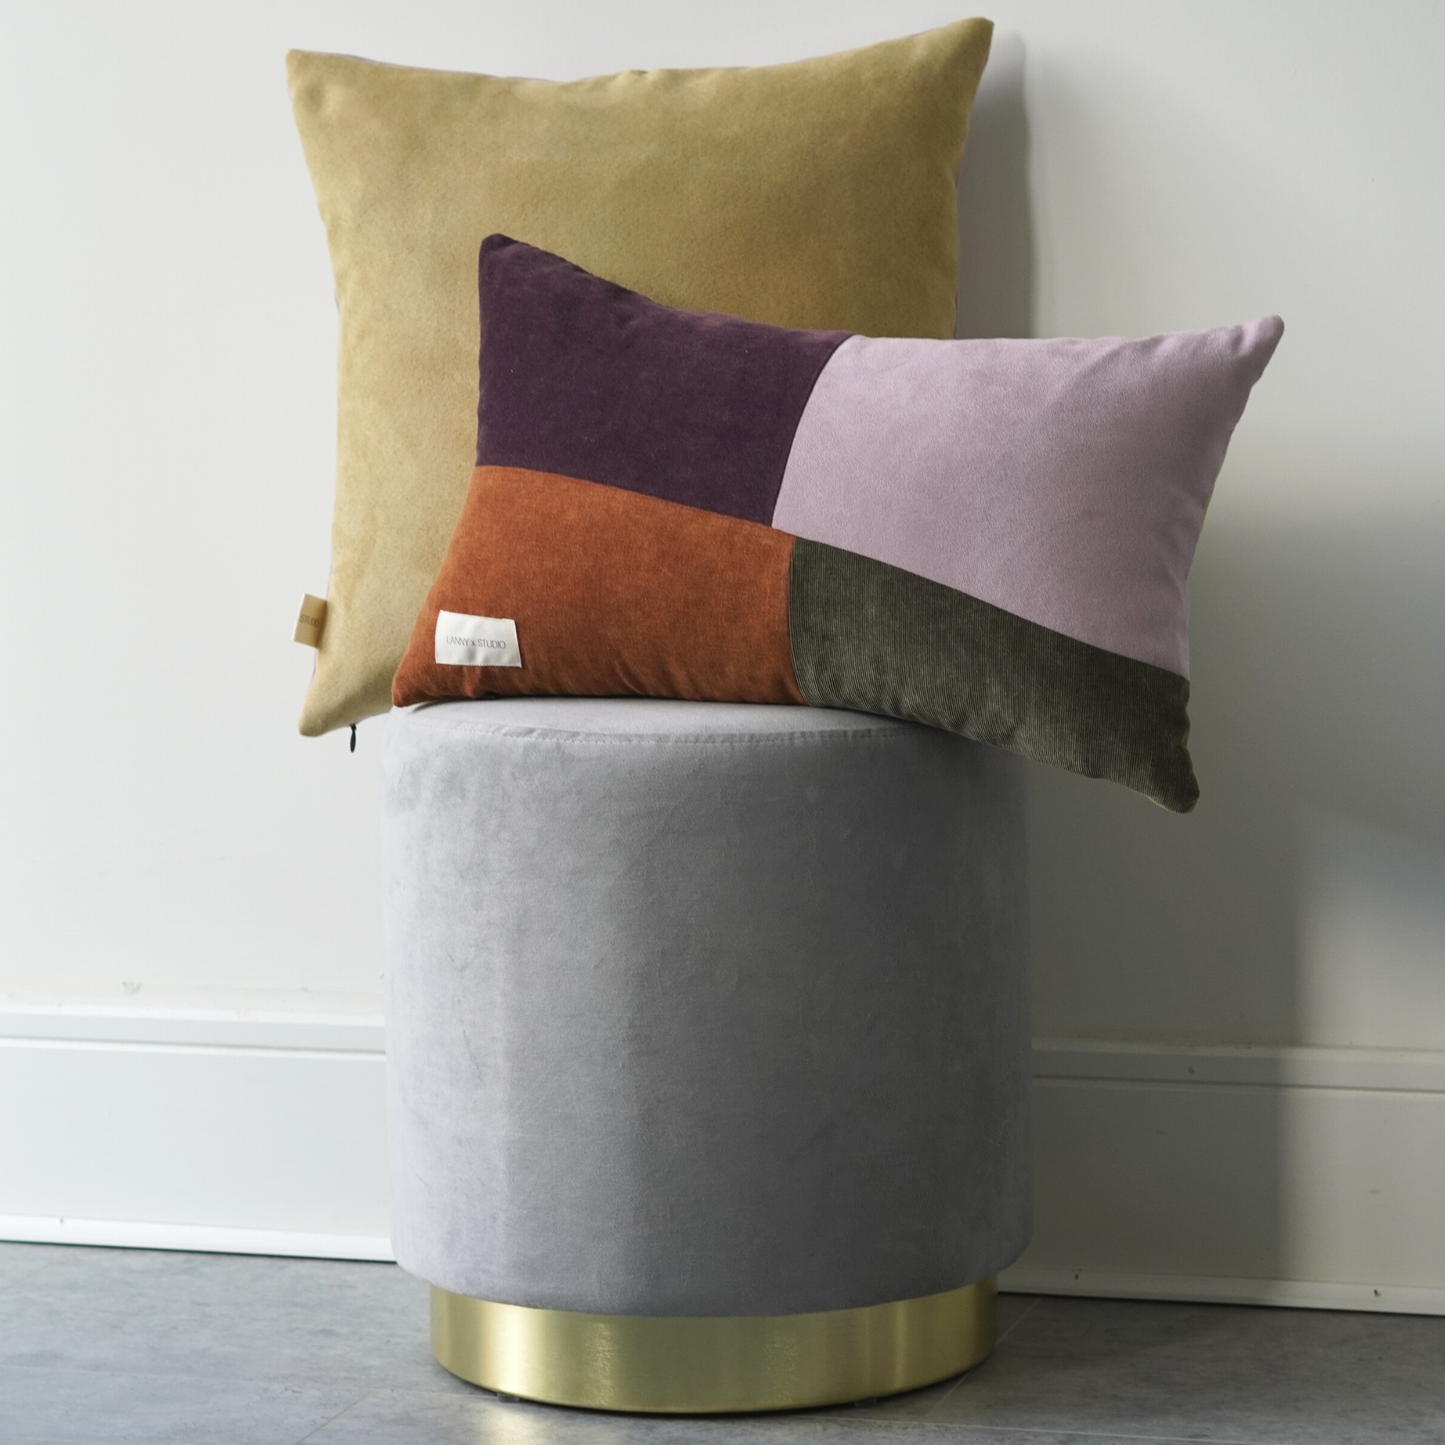 Orange, Purple, Green and Lilac panelled rentable cushion with branded LannyxStudio label partnered with the yellow and lilac suede look square cushion.  